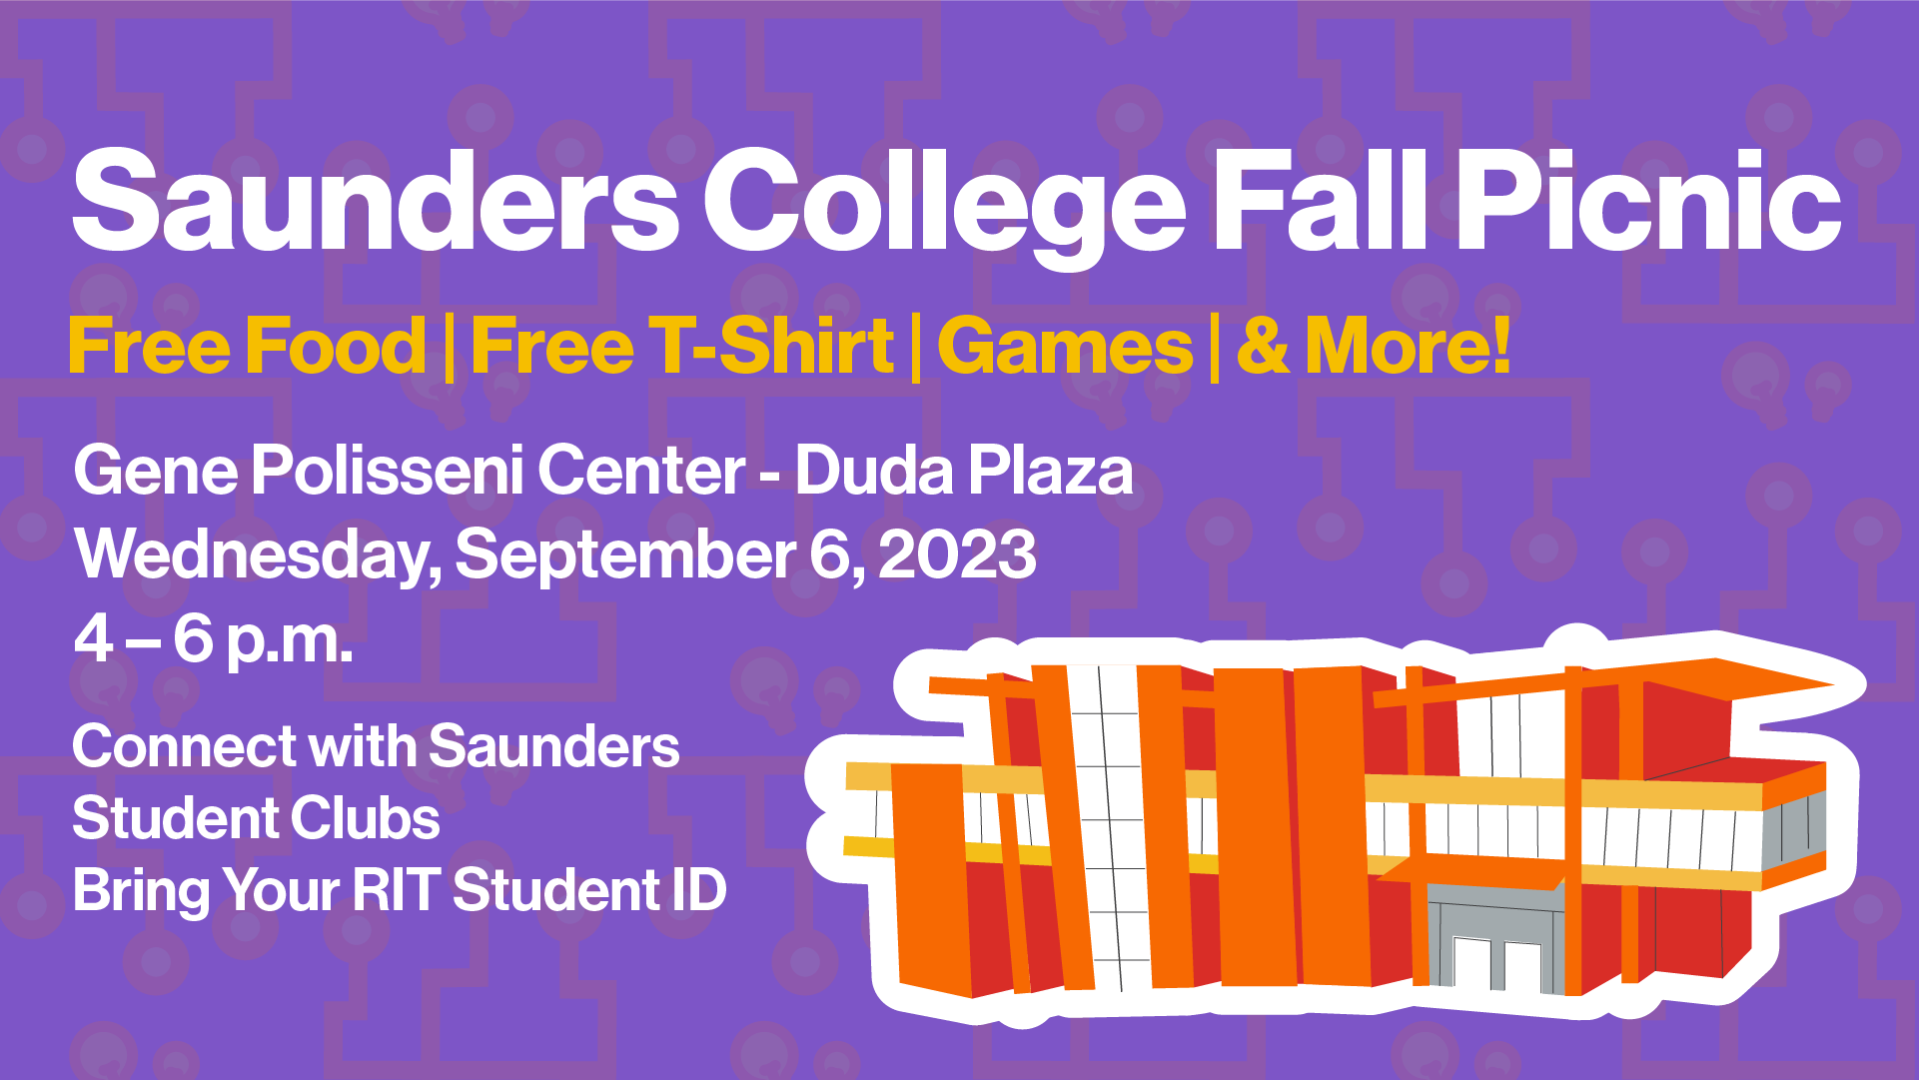 Saunders College of Business Fall Picnic